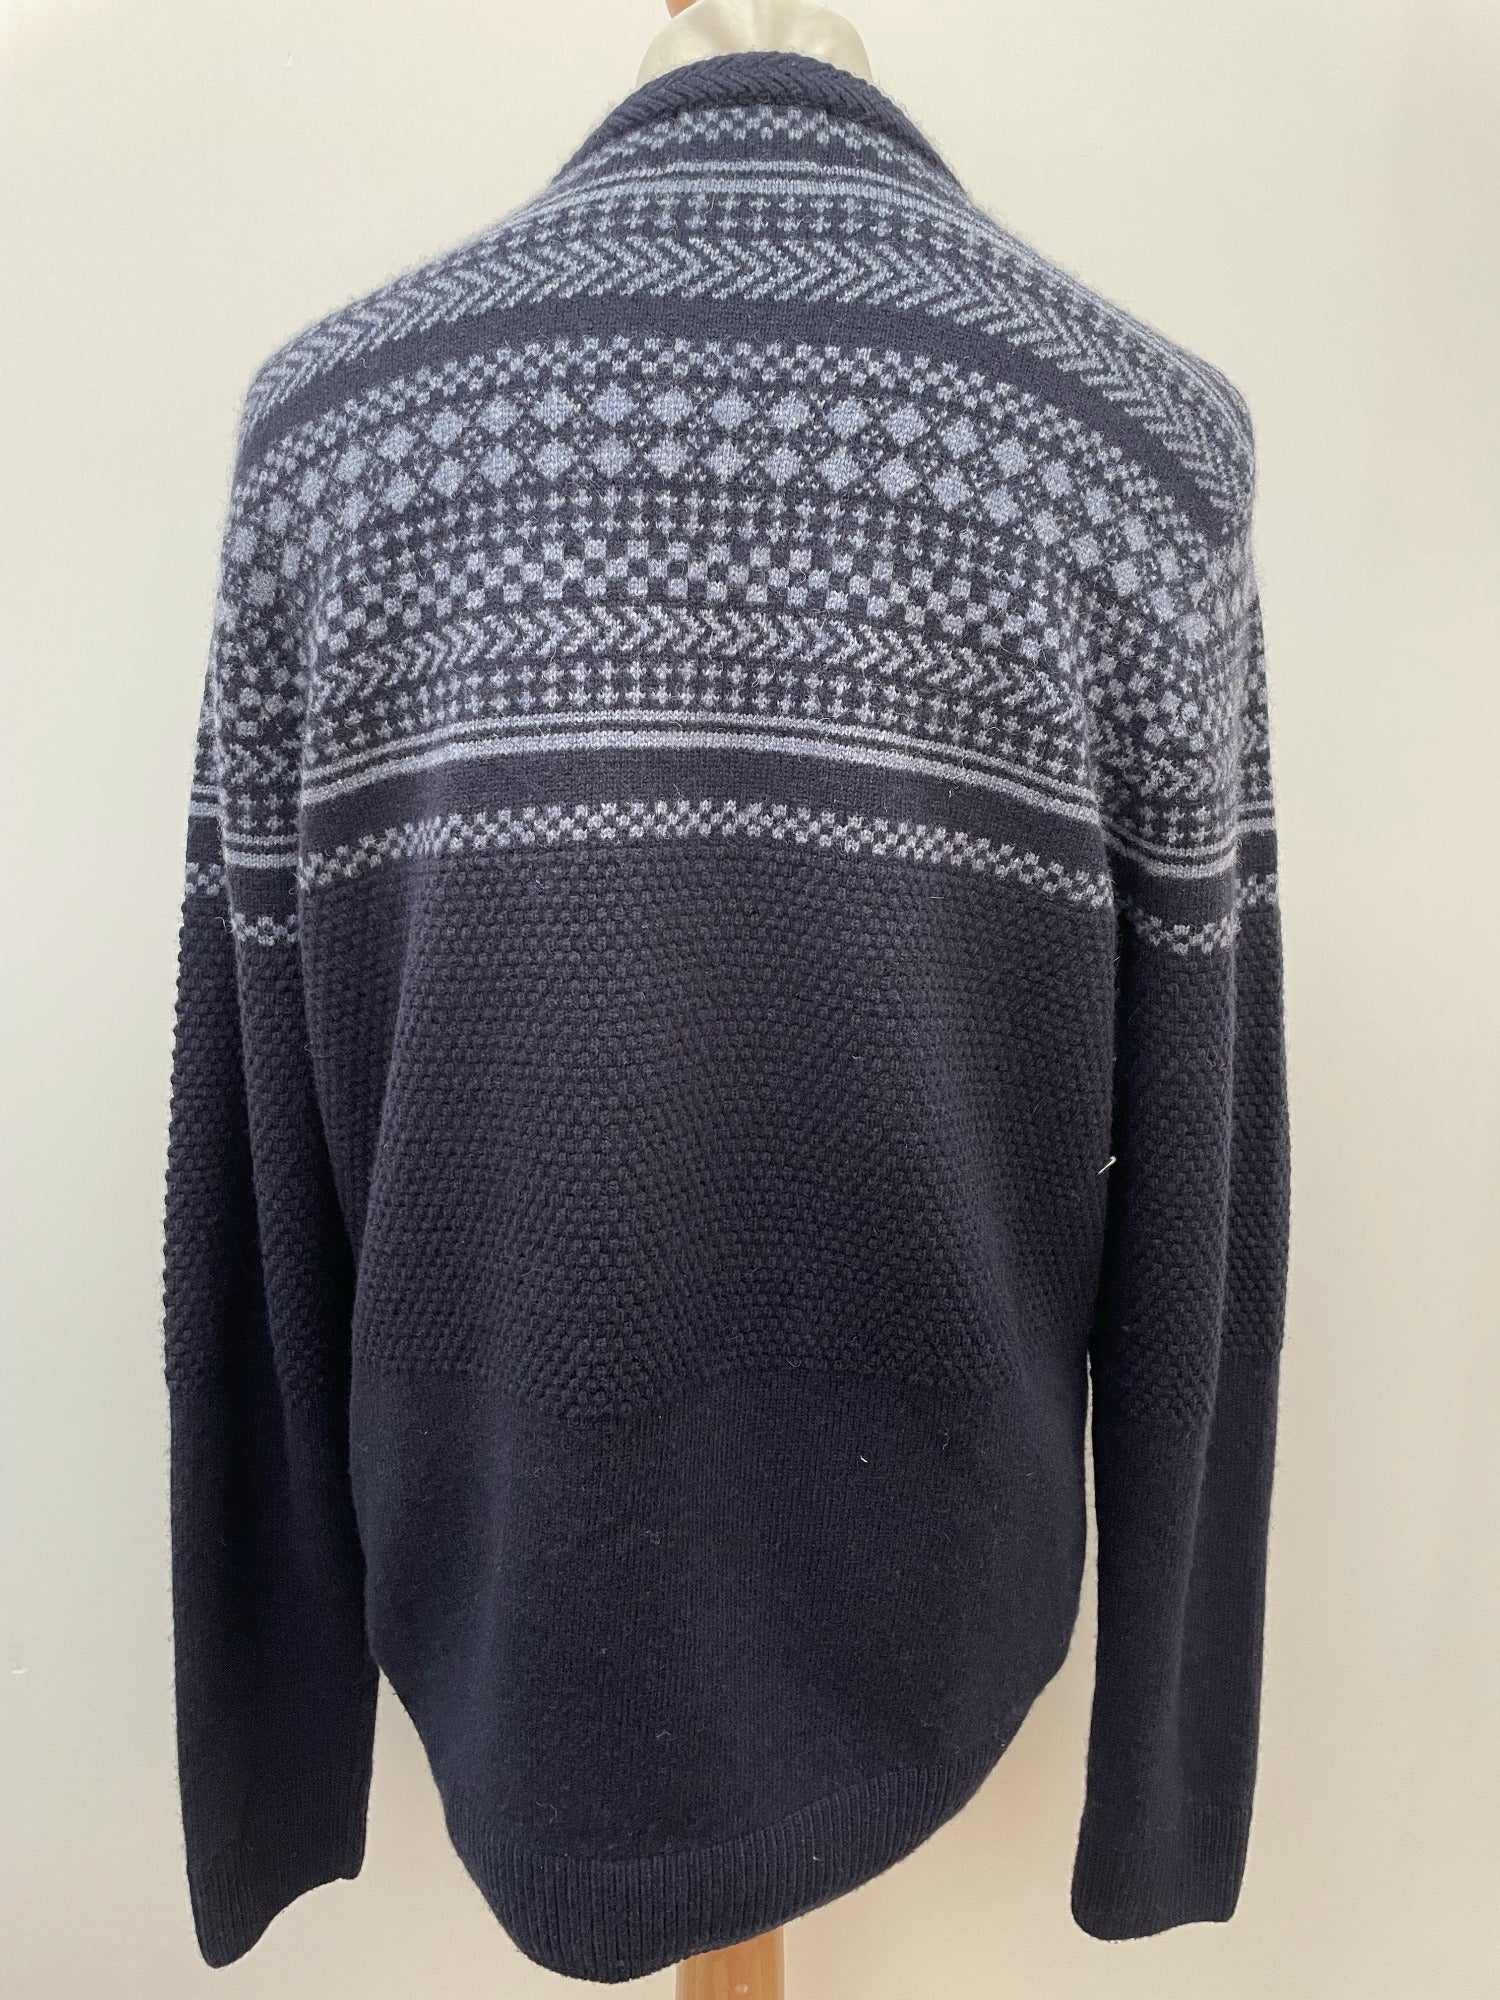 vintage  Urban Village Vintage  urban village  thick  mens  logo  Lambswool cotton blend  lambswool  L  knitwear  knitted  knit  Fred Perry  Fairisle Pattern  fairisle  fair isle  embroidered logo  elasticated